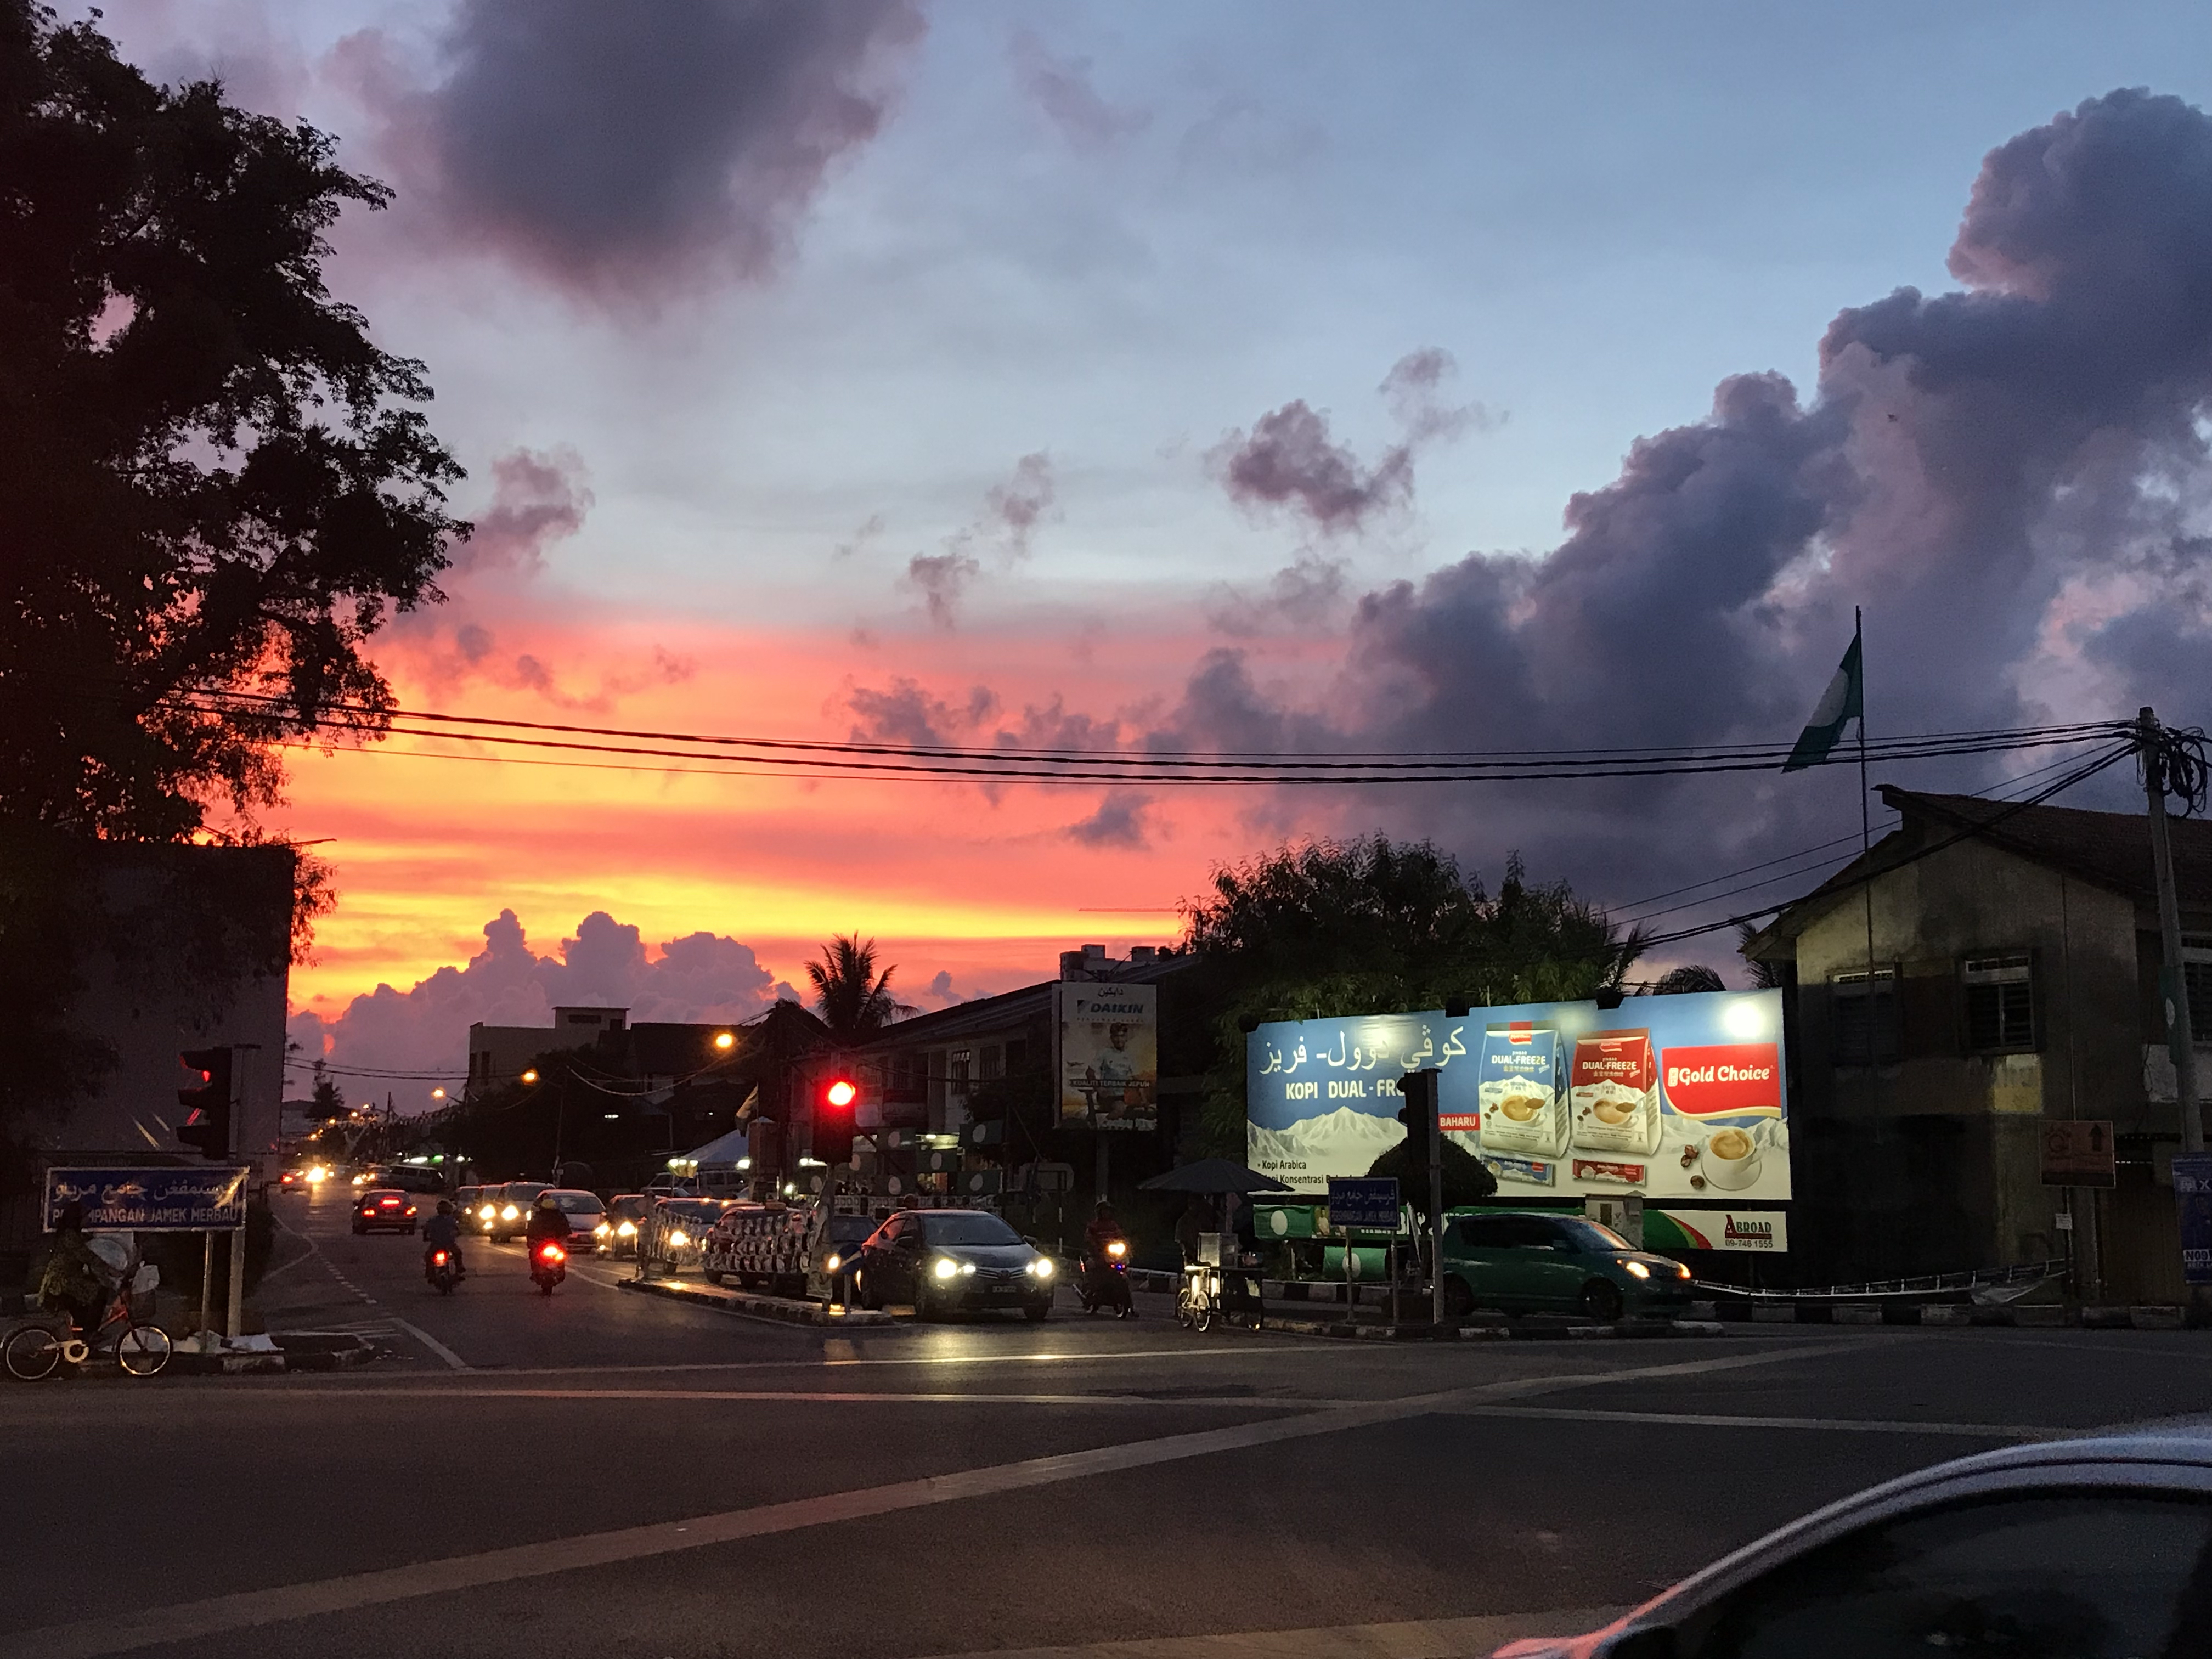 A flag flies over a busy intersection in Kota Bharu, Malaysia as the sun sets.